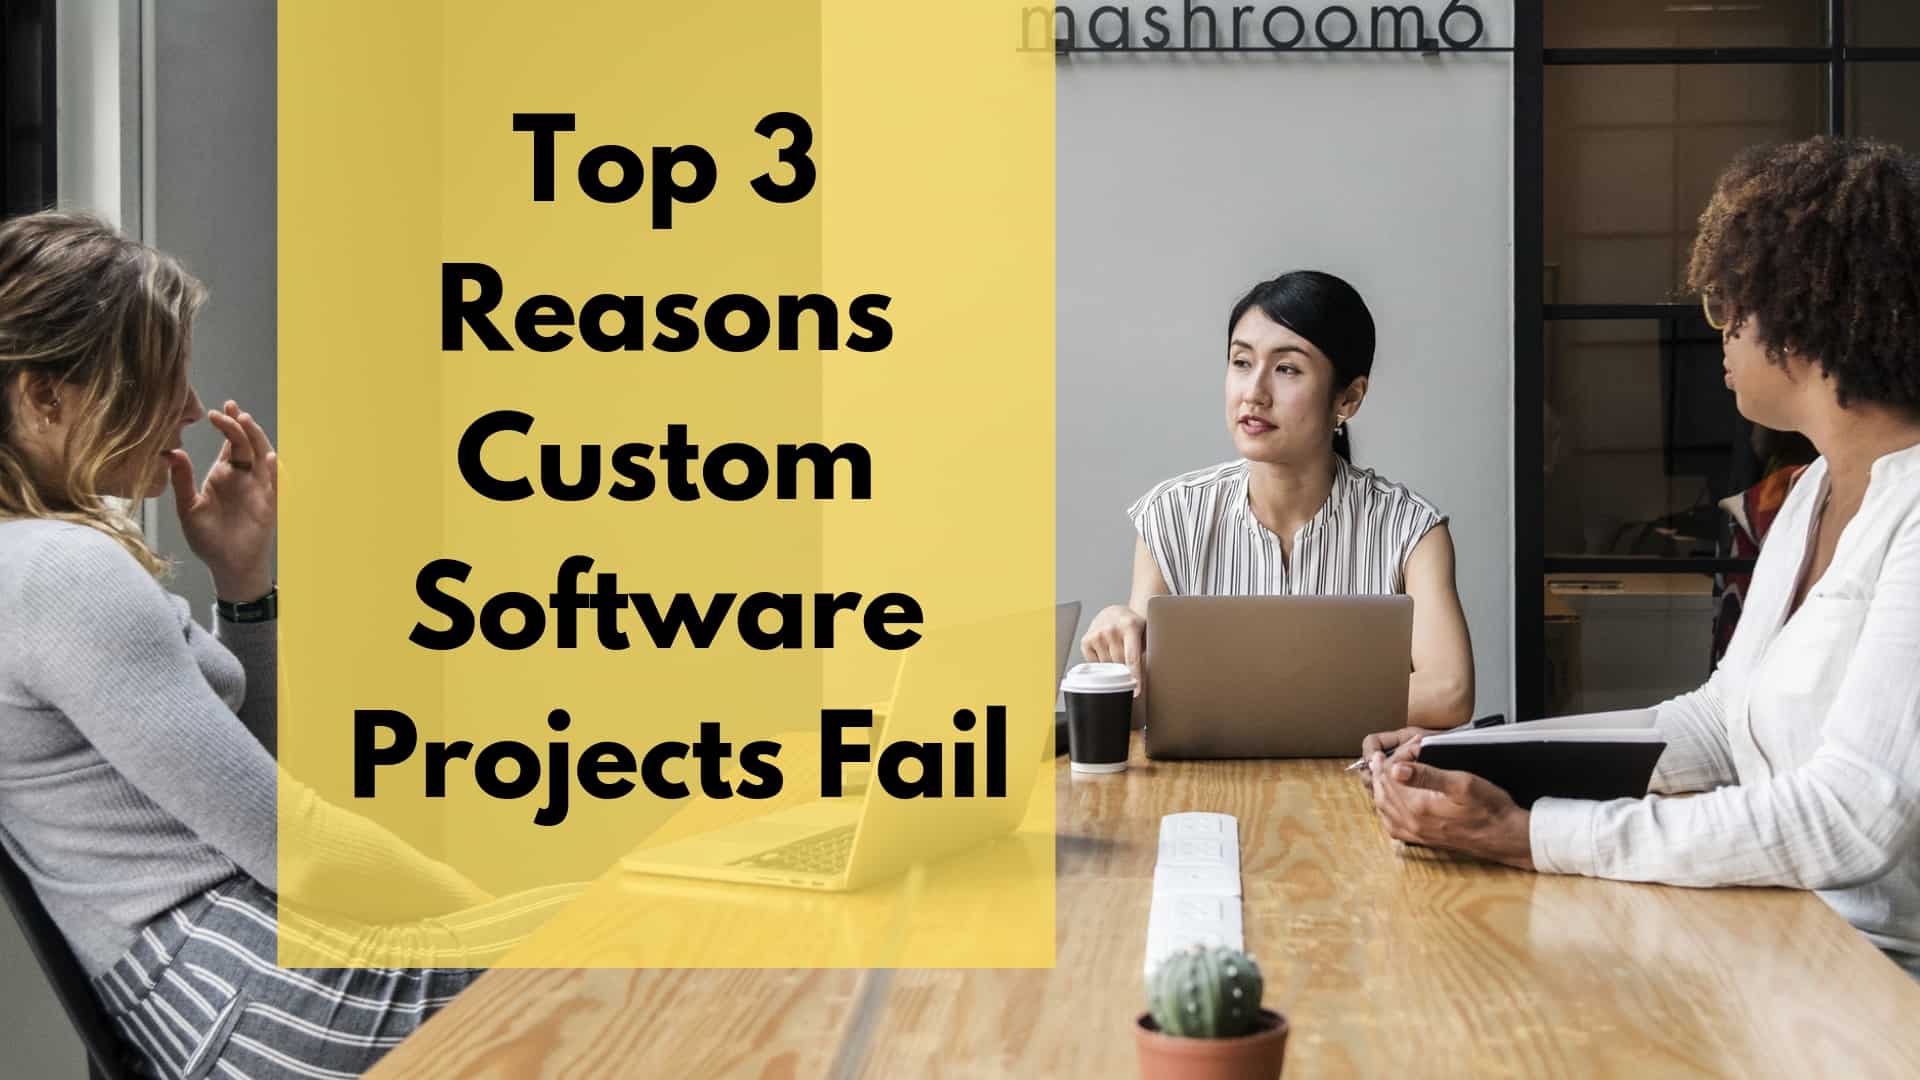 Top 3 Reasons Custom Software Projects Fail